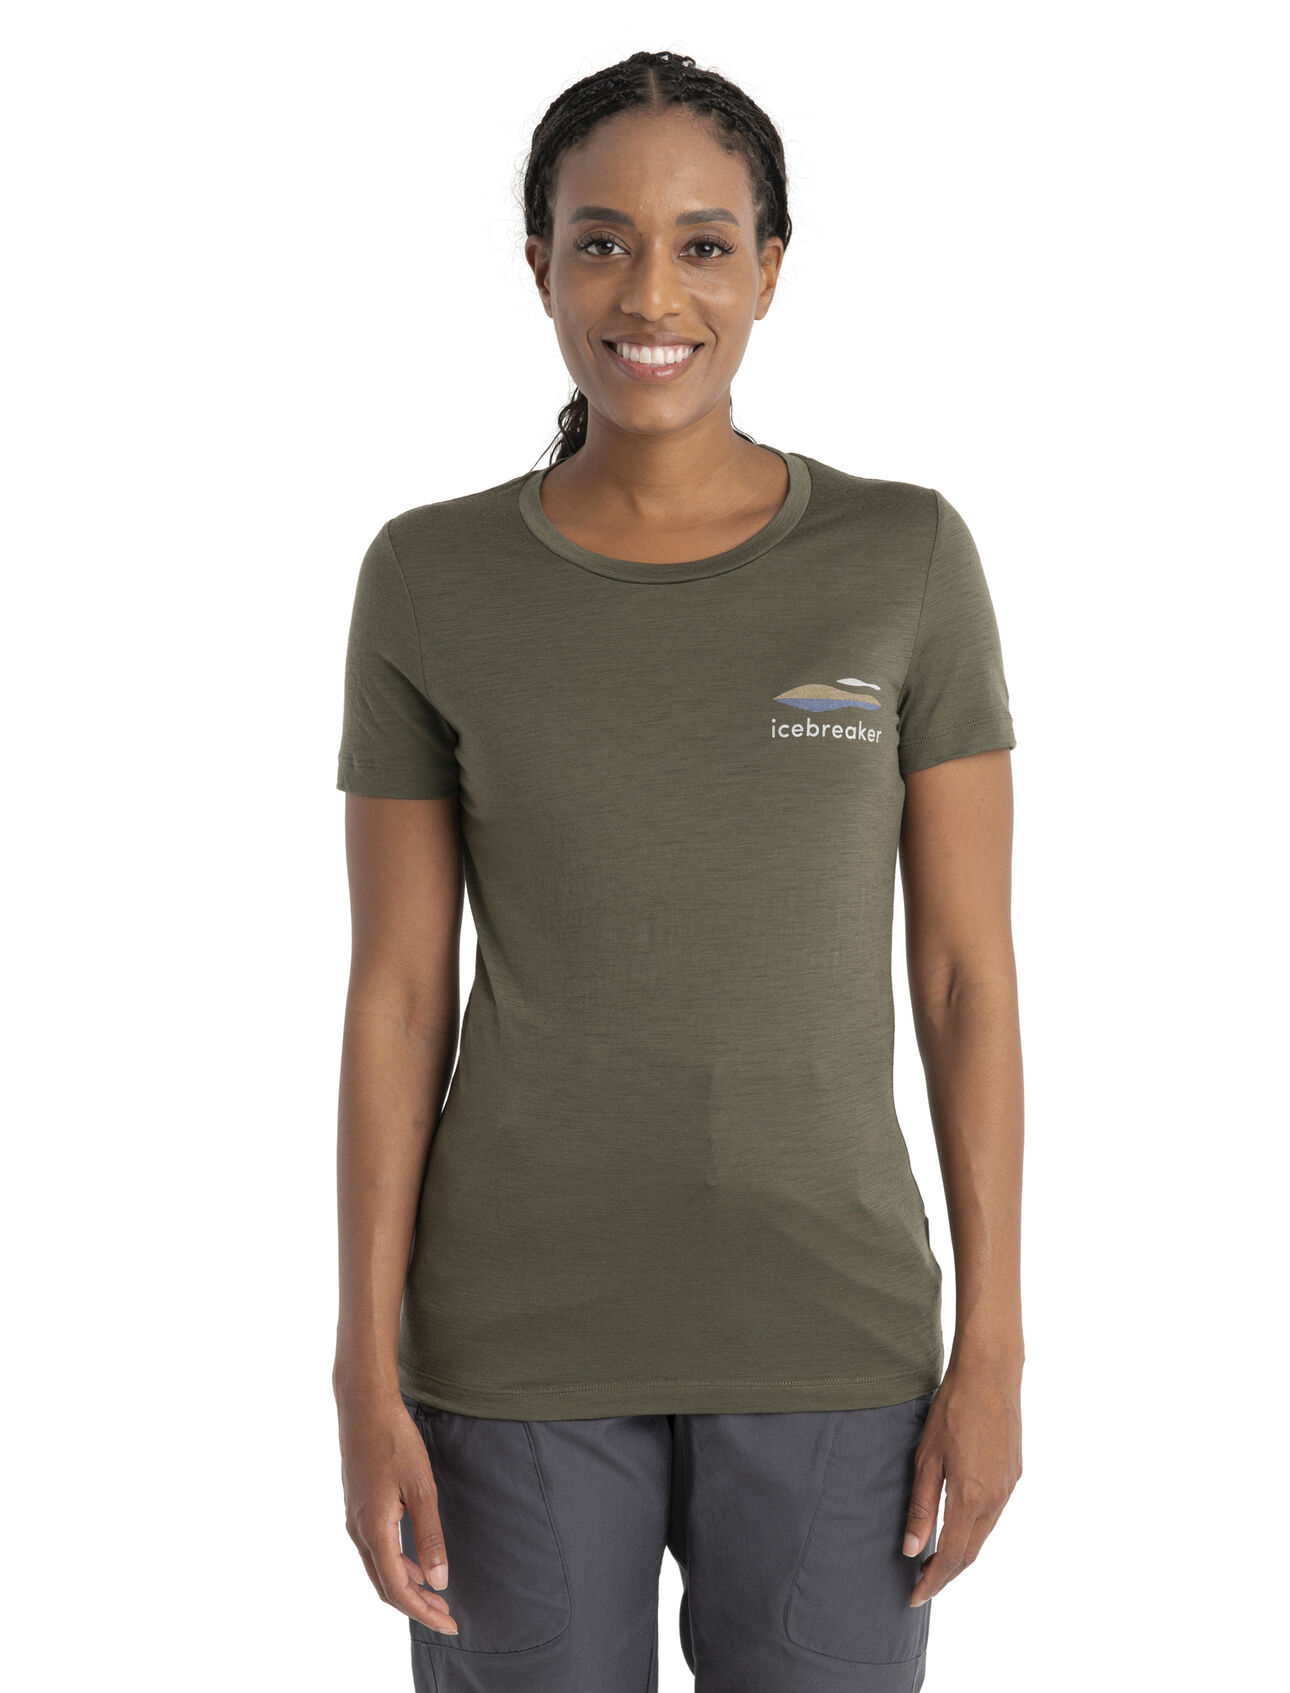 Womens Merino 150 Tech Lite II Short Sleeve T-Shirt Aotearoa Our versatile tech tee that provides comfort, breathability and odour-resistance for any adventure you can think of, the 150 Tech Lite II Short Sleeve Scoop Tee Aotearoa features 100% merino for all-natural performance. The tee's original artwork features a logo graphic that pays homage to the Maori name for New Zealand—Aotearoa—which means Land of the Long White Cloud.